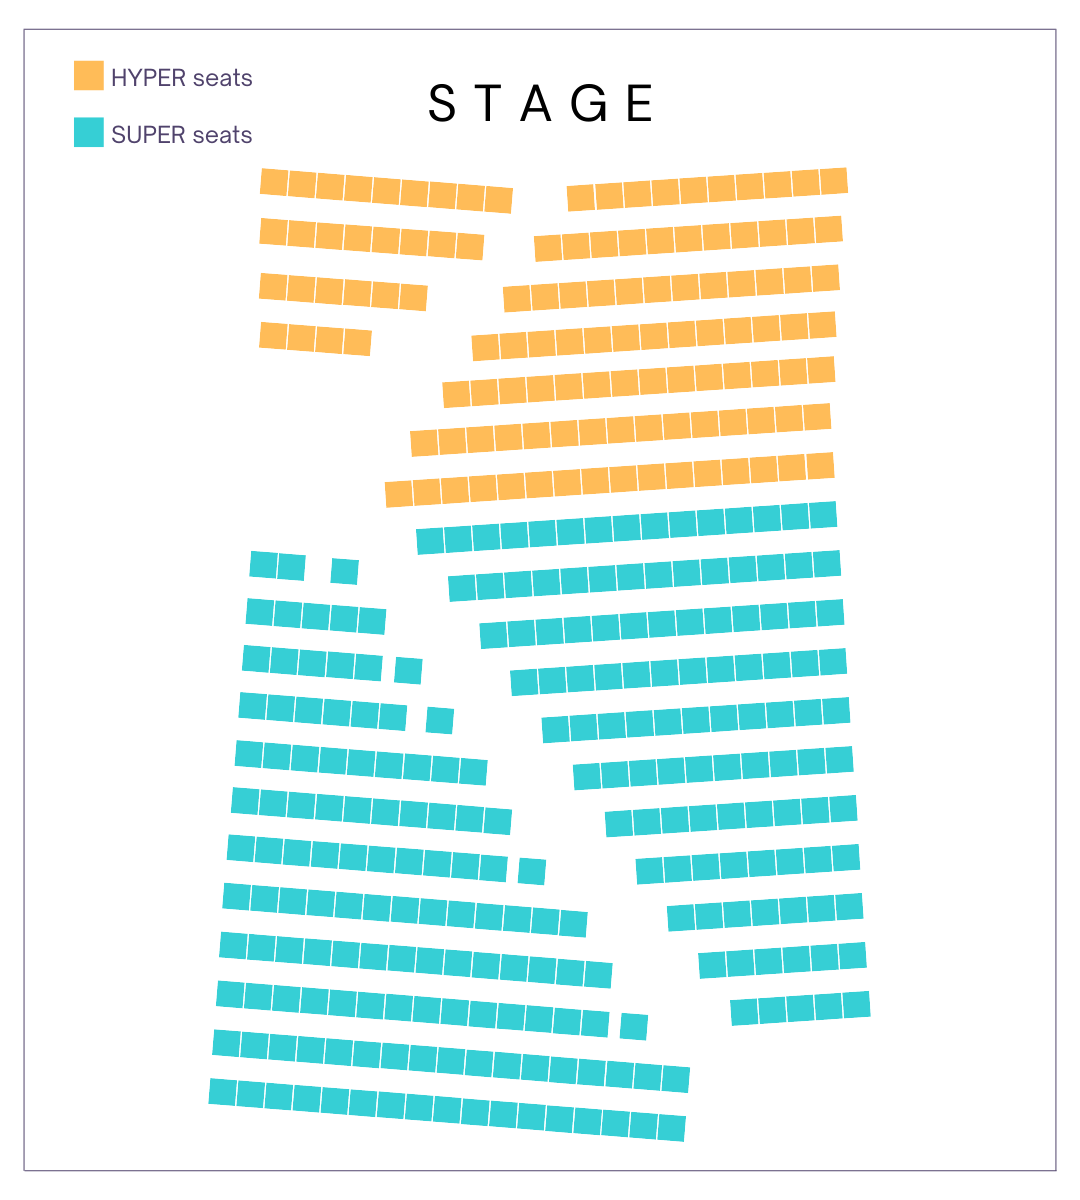 Seating map with the first seven rows highlighted as hyper seats and the following thirteen rows highlighted as super seats